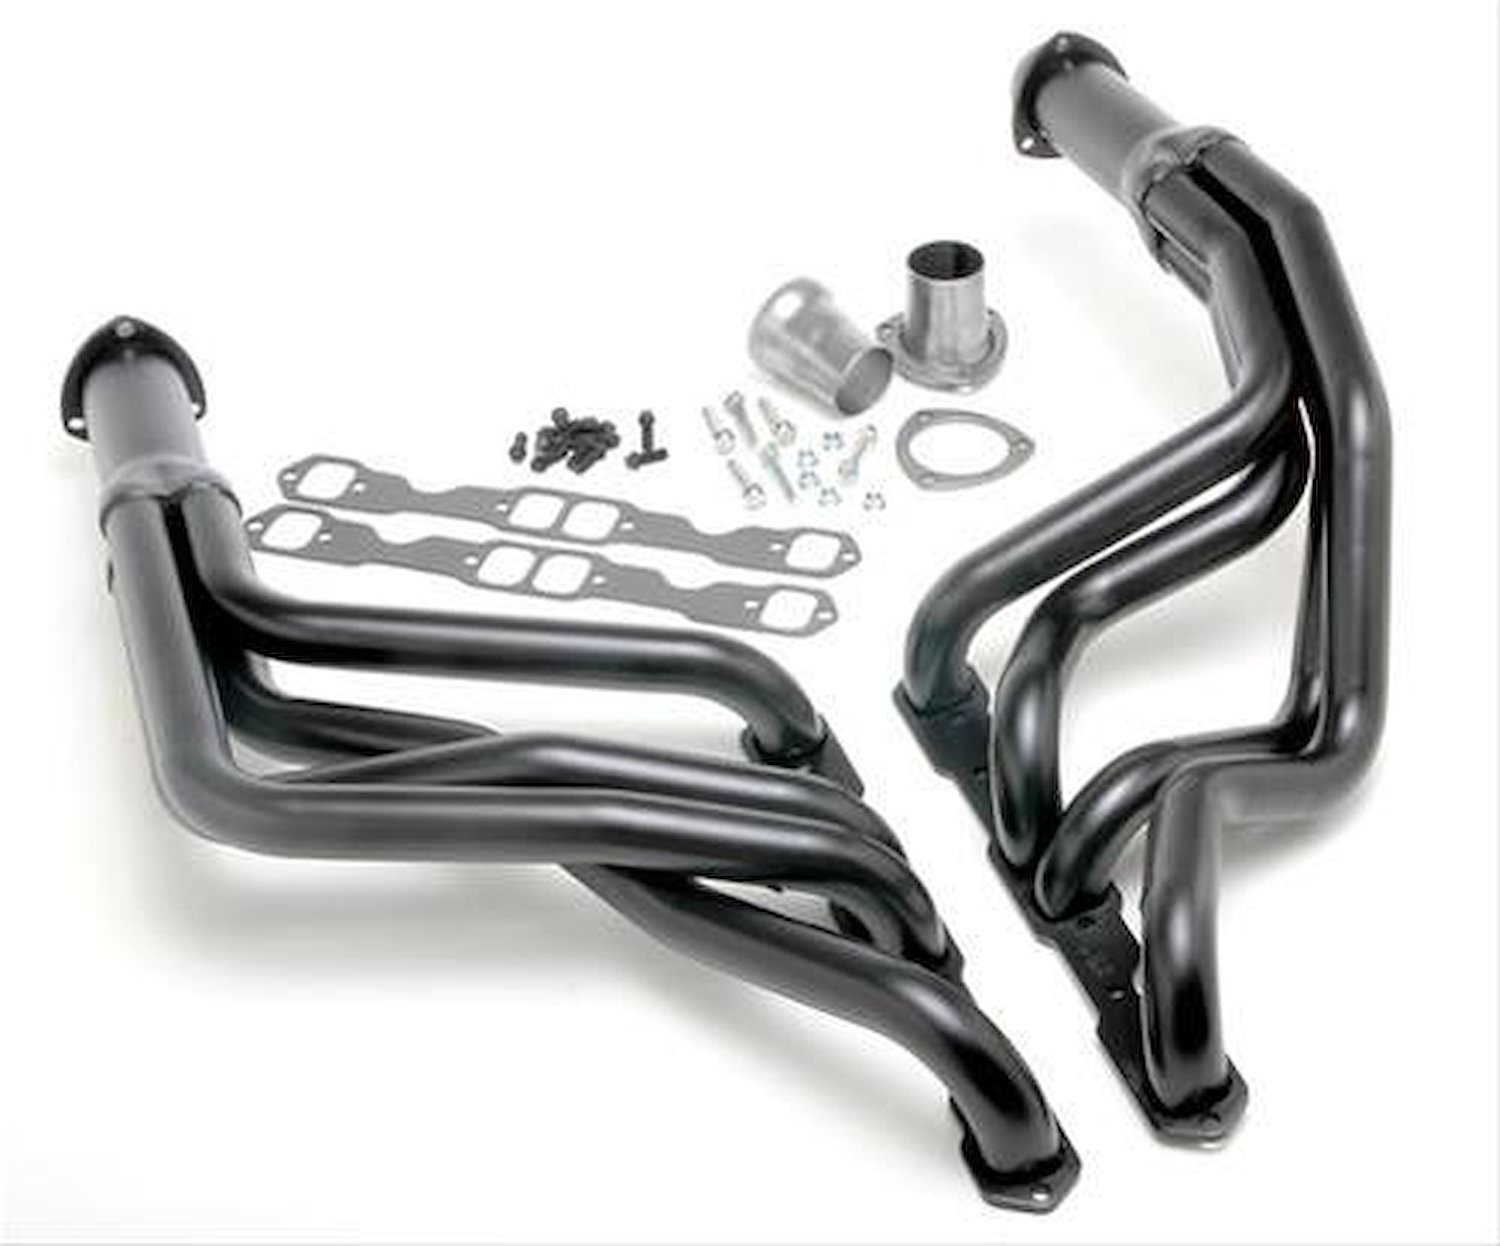 ELITE Ultra-Duty Street Long Tube Headers fits 1967-1977 Chevy Passenger Cars with Big Block Chevy 396-454